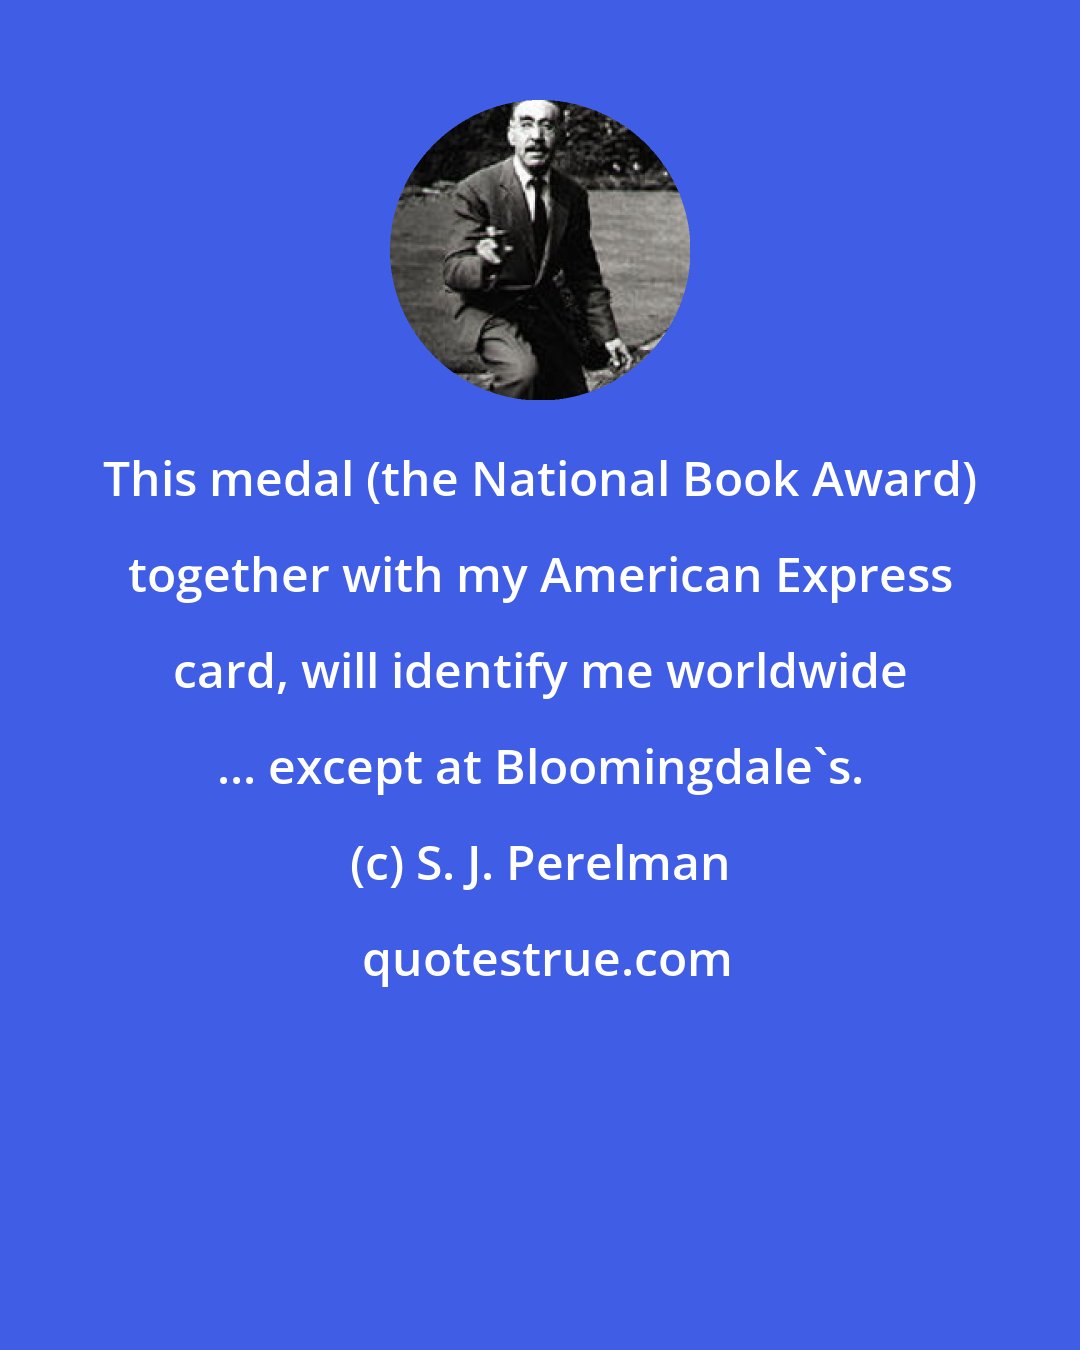 S. J. Perelman: This medal (the National Book Award) together with my American Express card, will identify me worldwide ... except at Bloomingdale's.